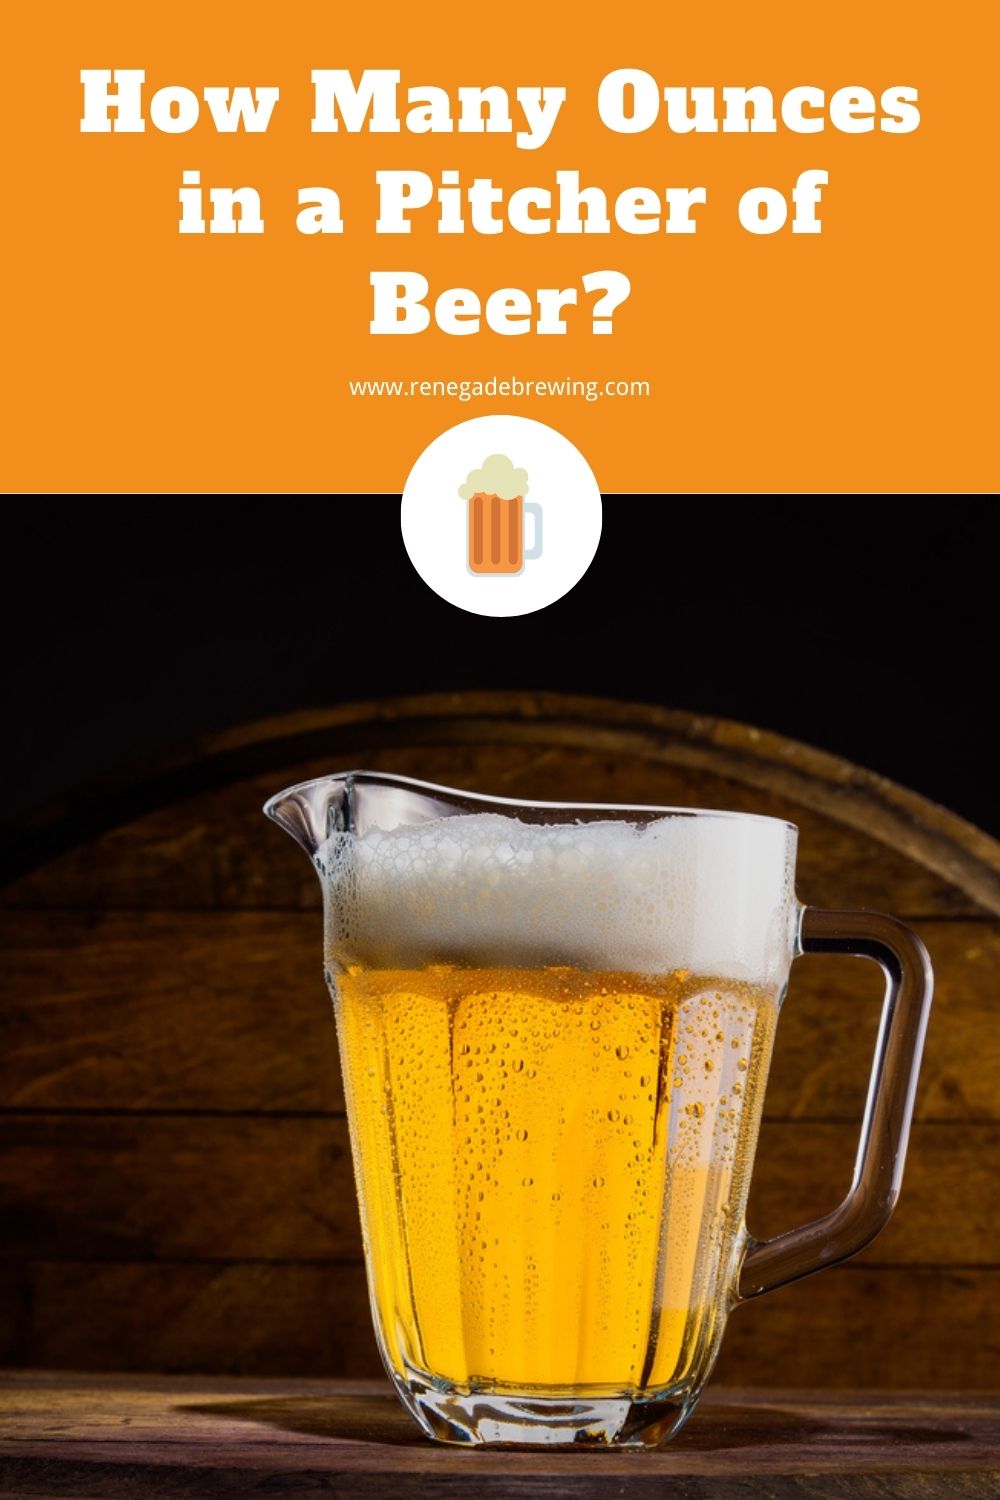 How Many Ounces is a Pitcher of Beer?